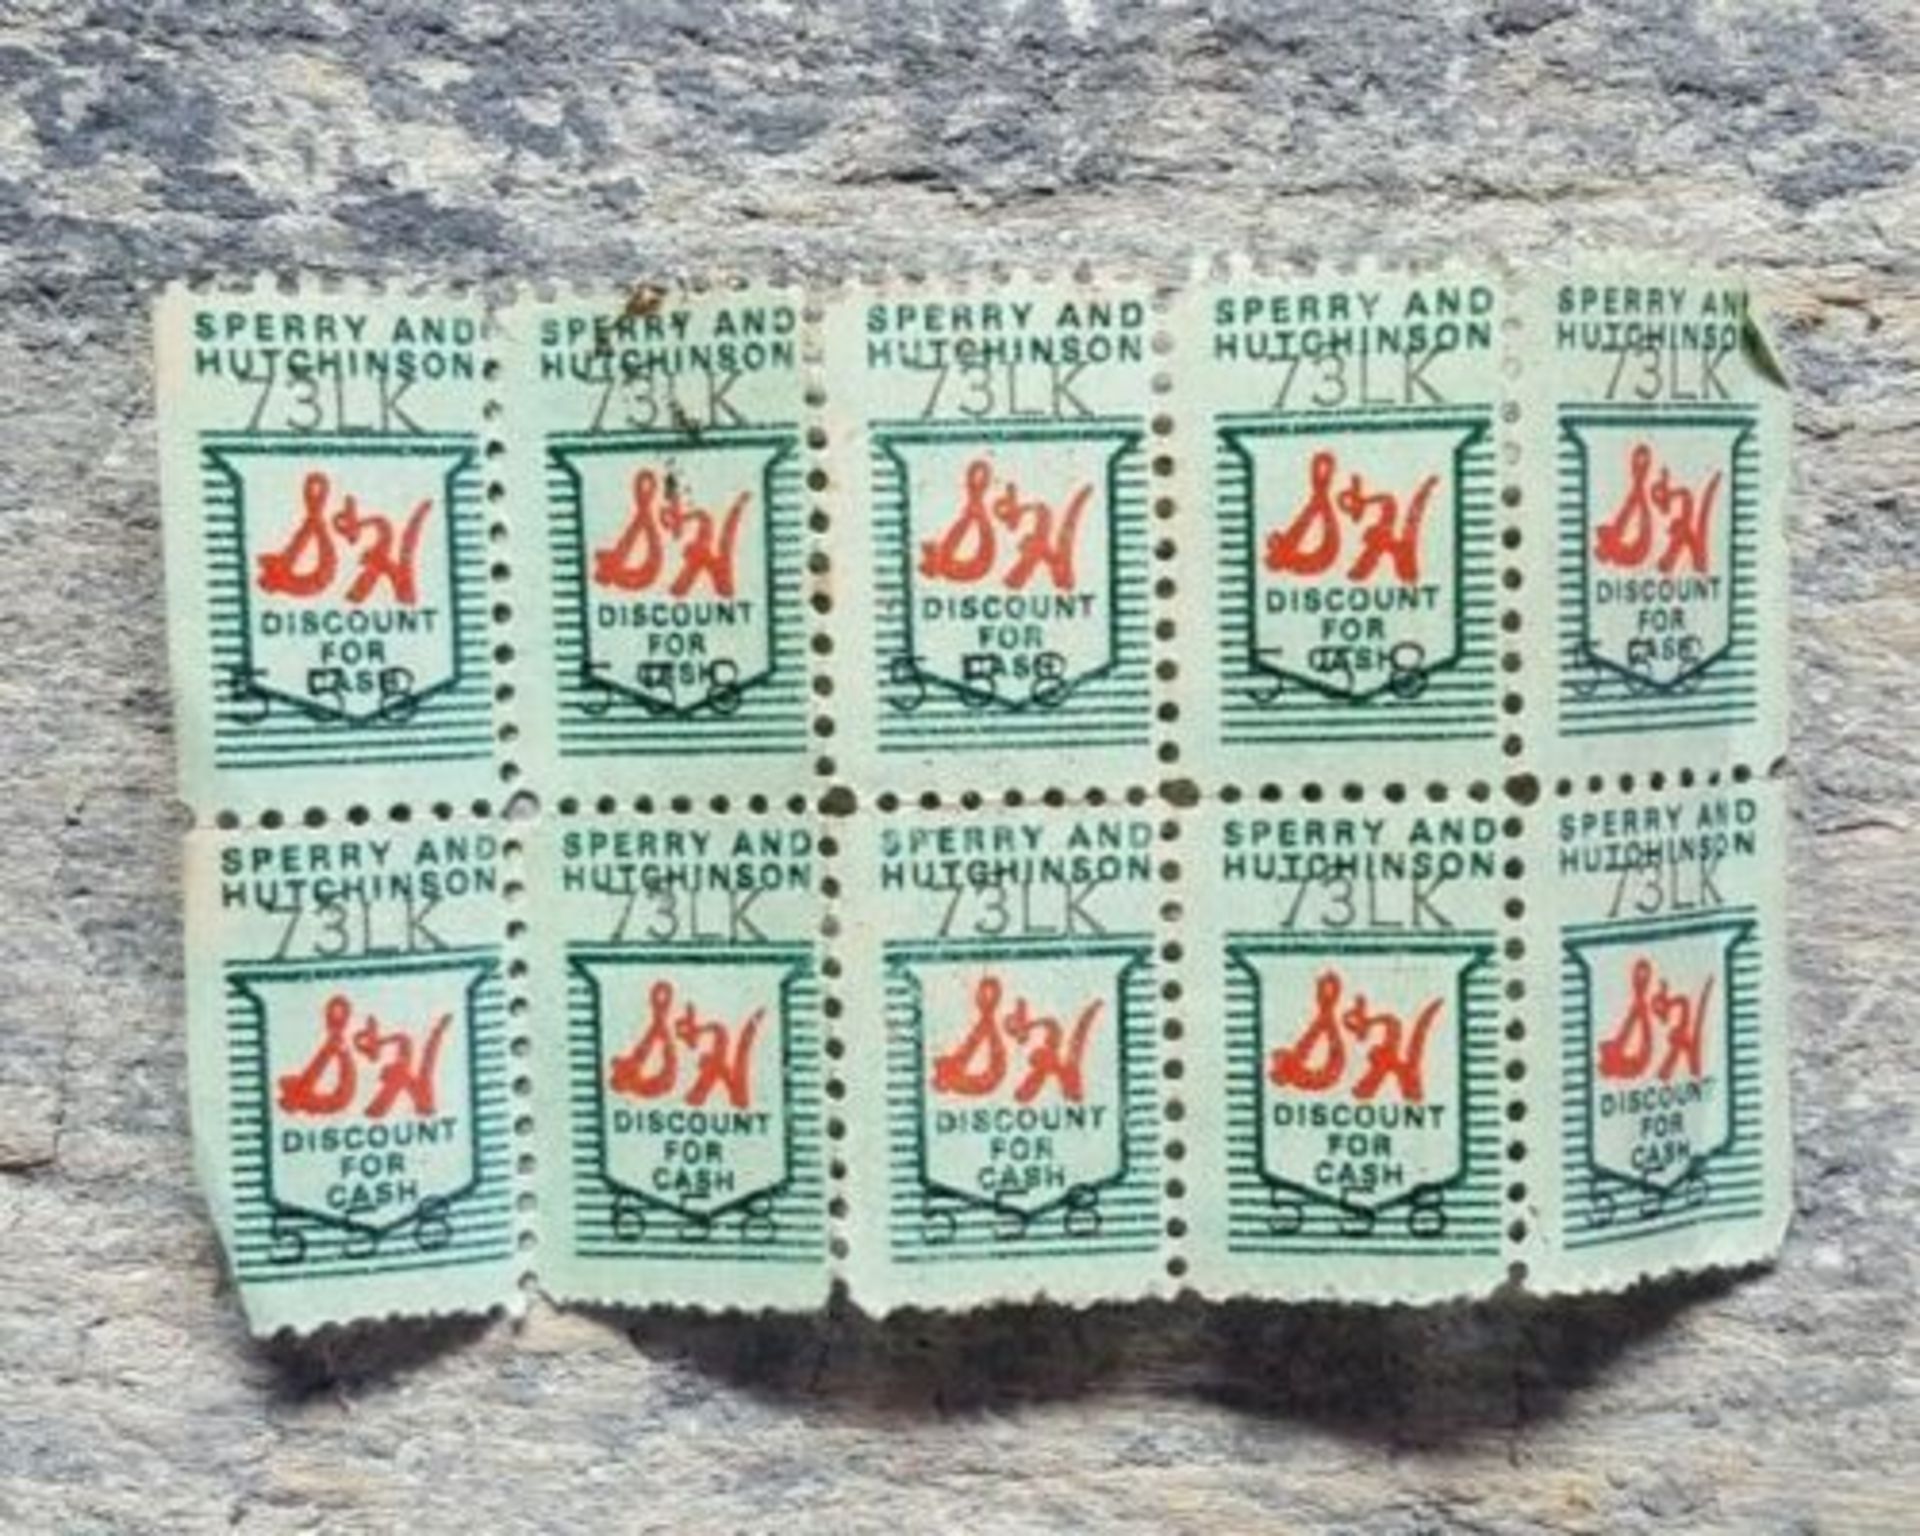 GIANT STAMP COLLECTION, MOSTLY UNUSED STAMPS - Image 6 of 7